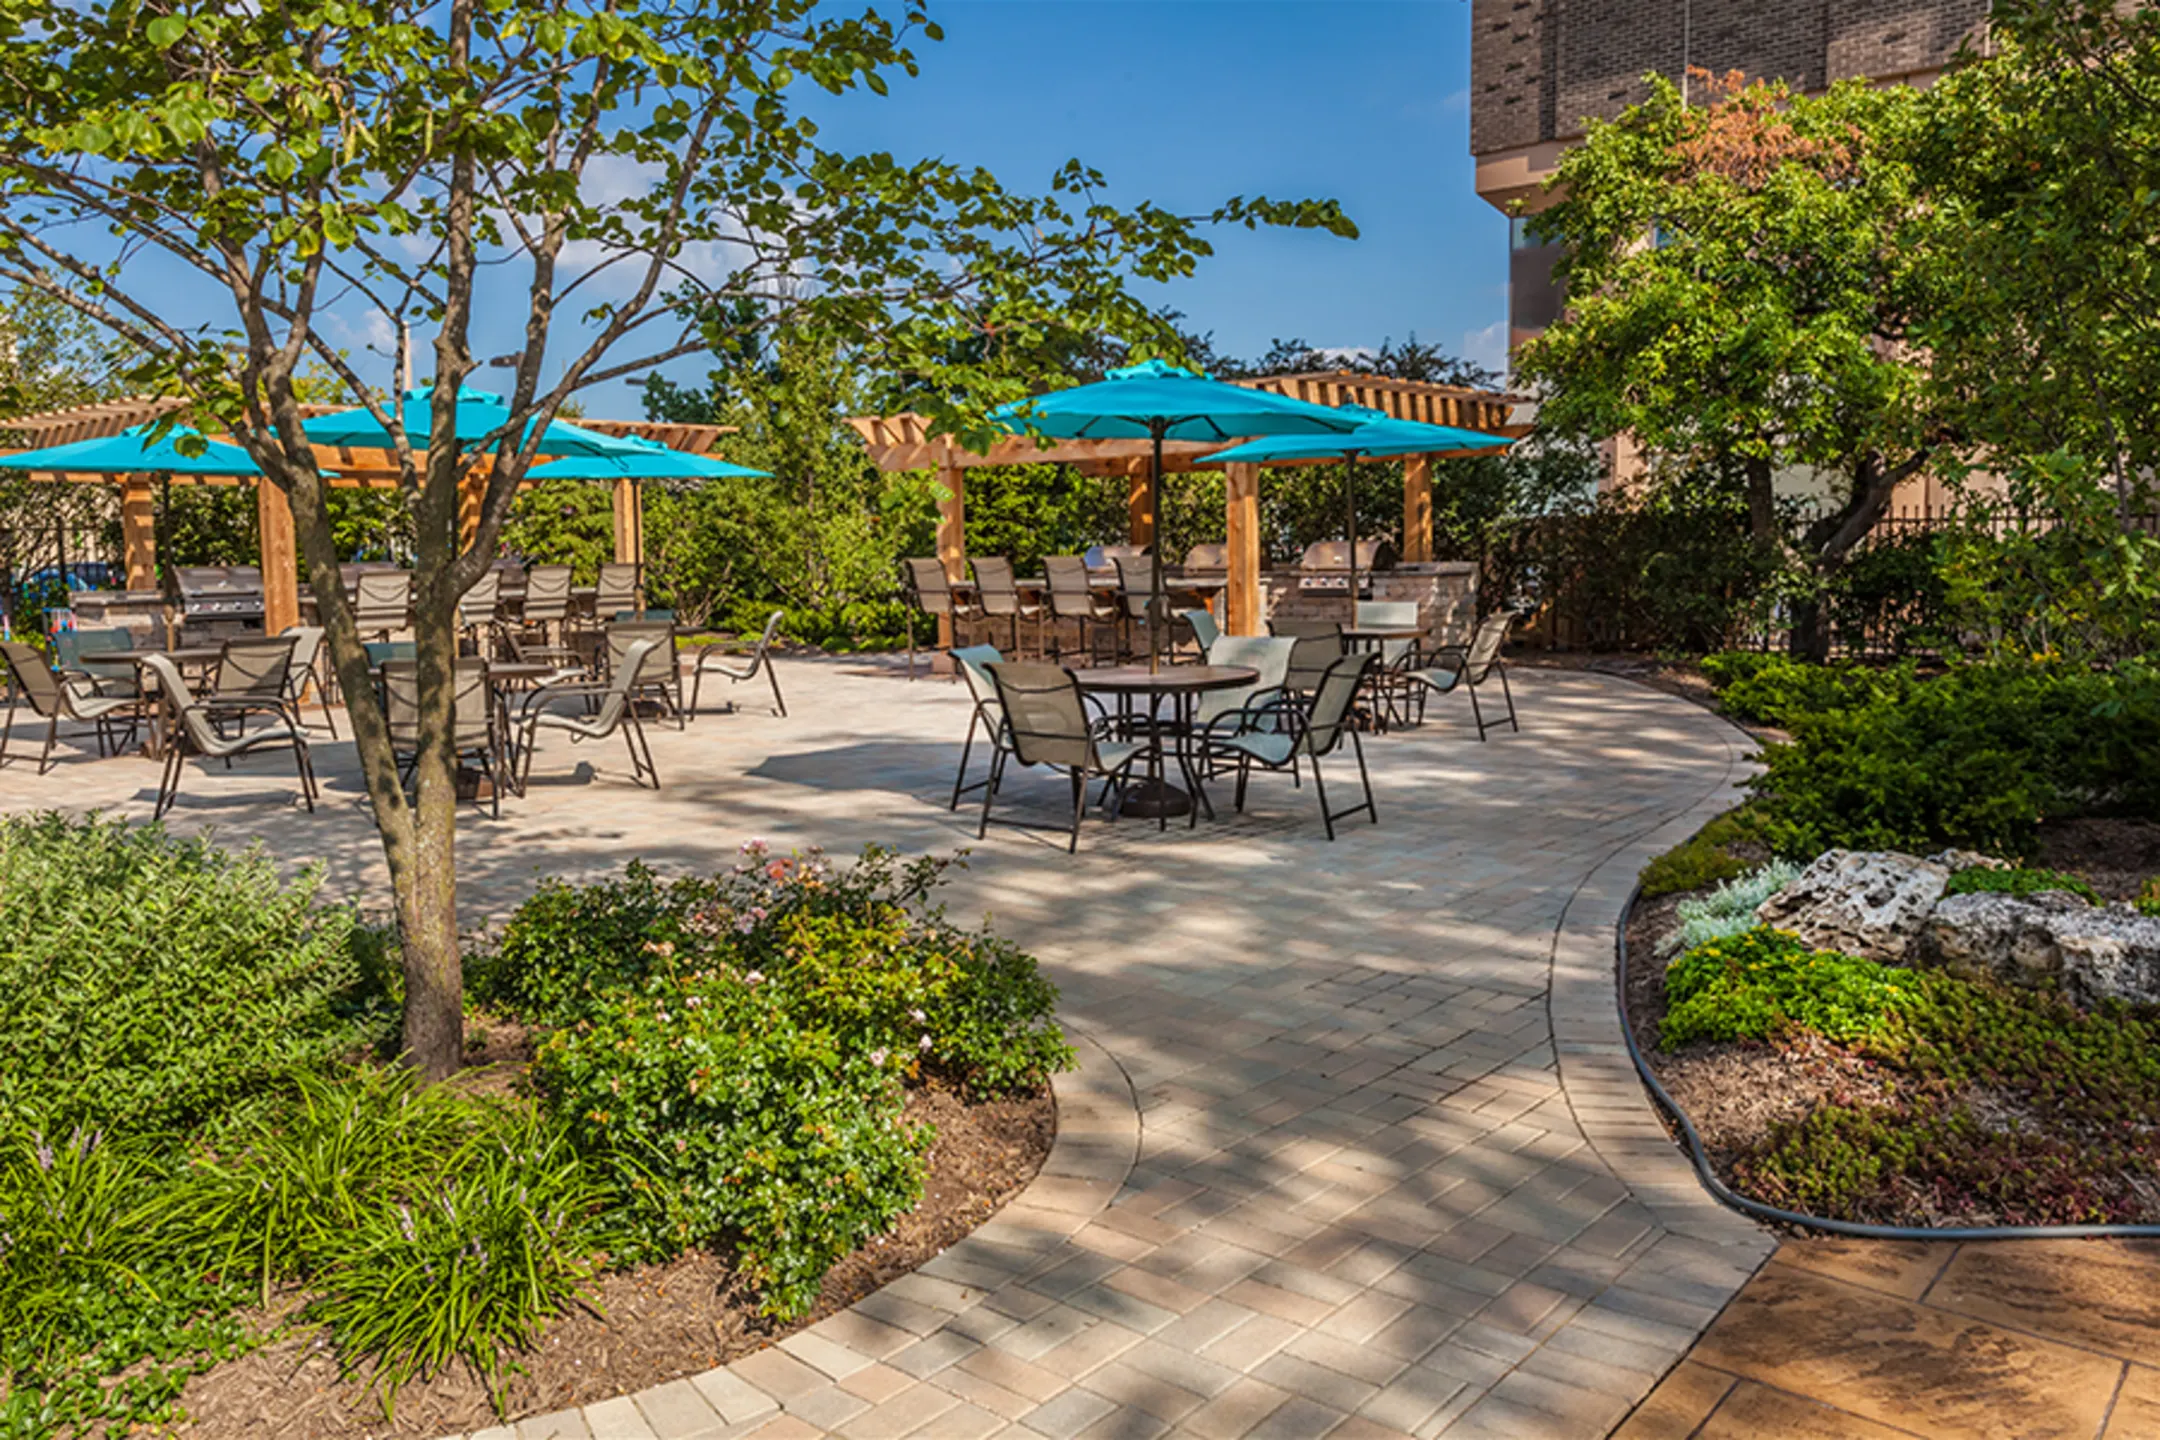 Patio / Deck - Riley Towers Apartments &Townhomes - Indianapolis, IN